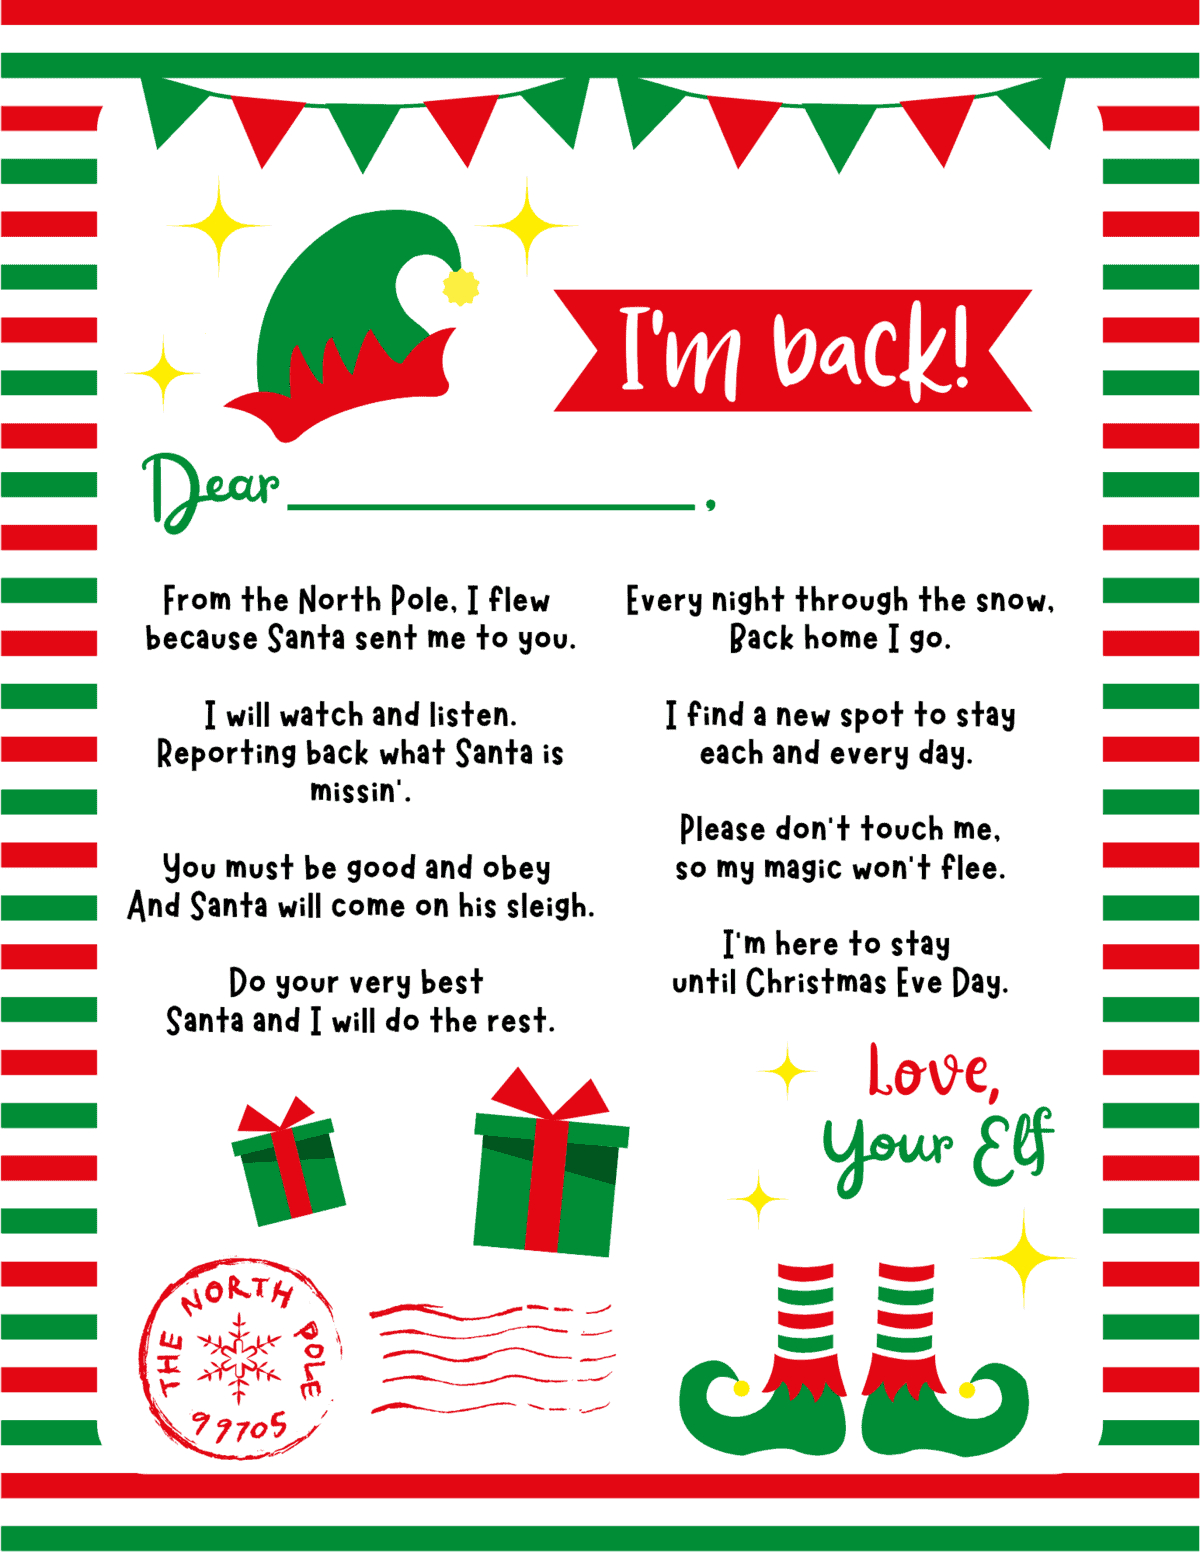 Free Printable Elf On The Shelf Arrival Letter - Prudent Penny Pincher intended for Elf On The Shelf Welcome Back Letter Free Printable